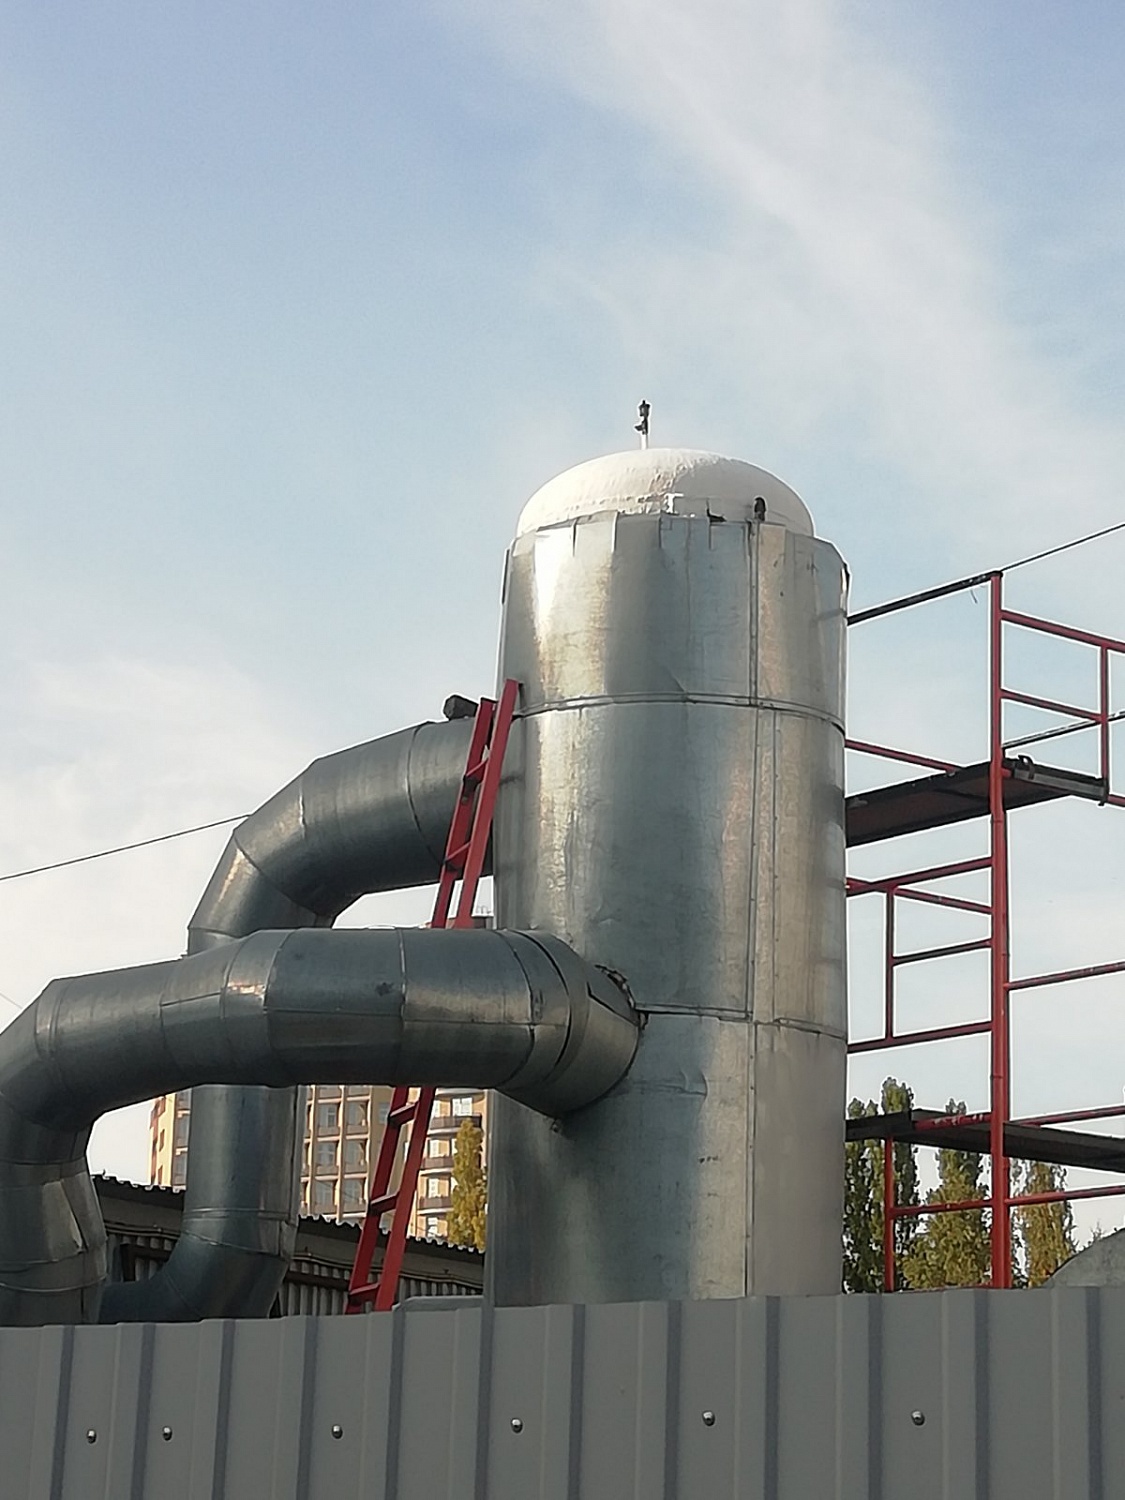 Bronya Classic NF on the boiler of the water sports palace "Burtasy", Penza (photo)